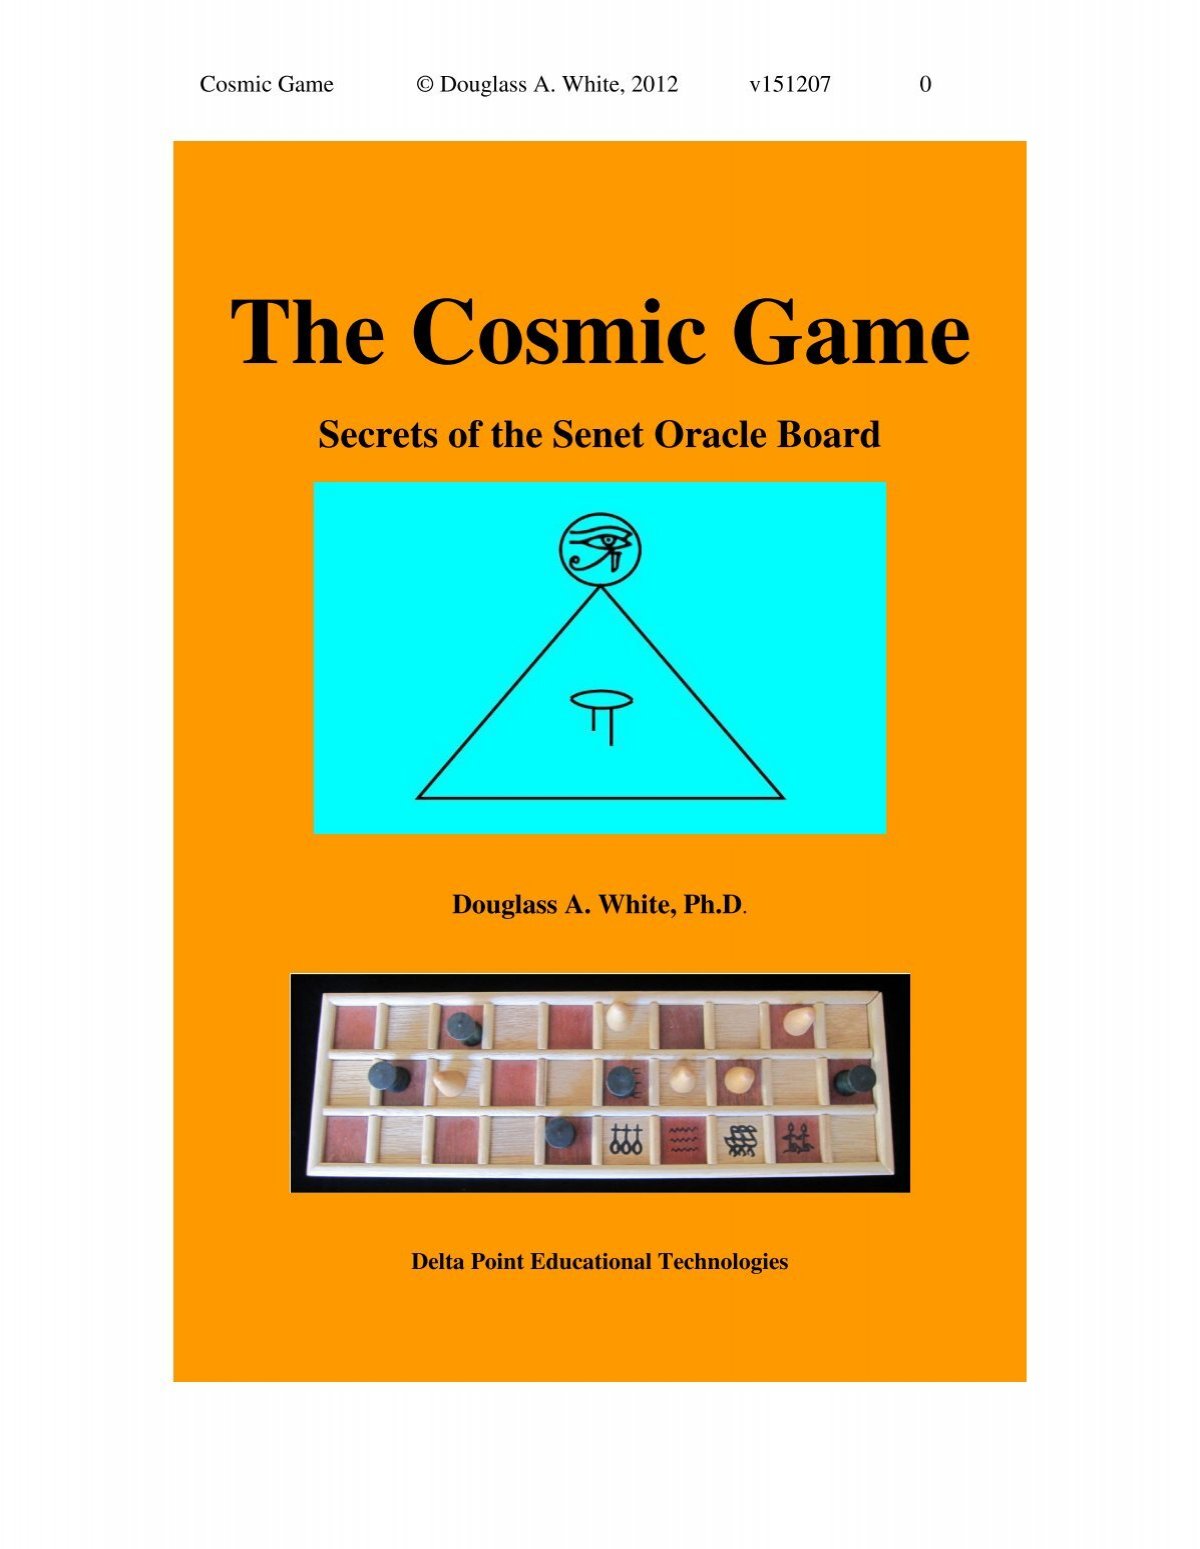 The Cosmic Game